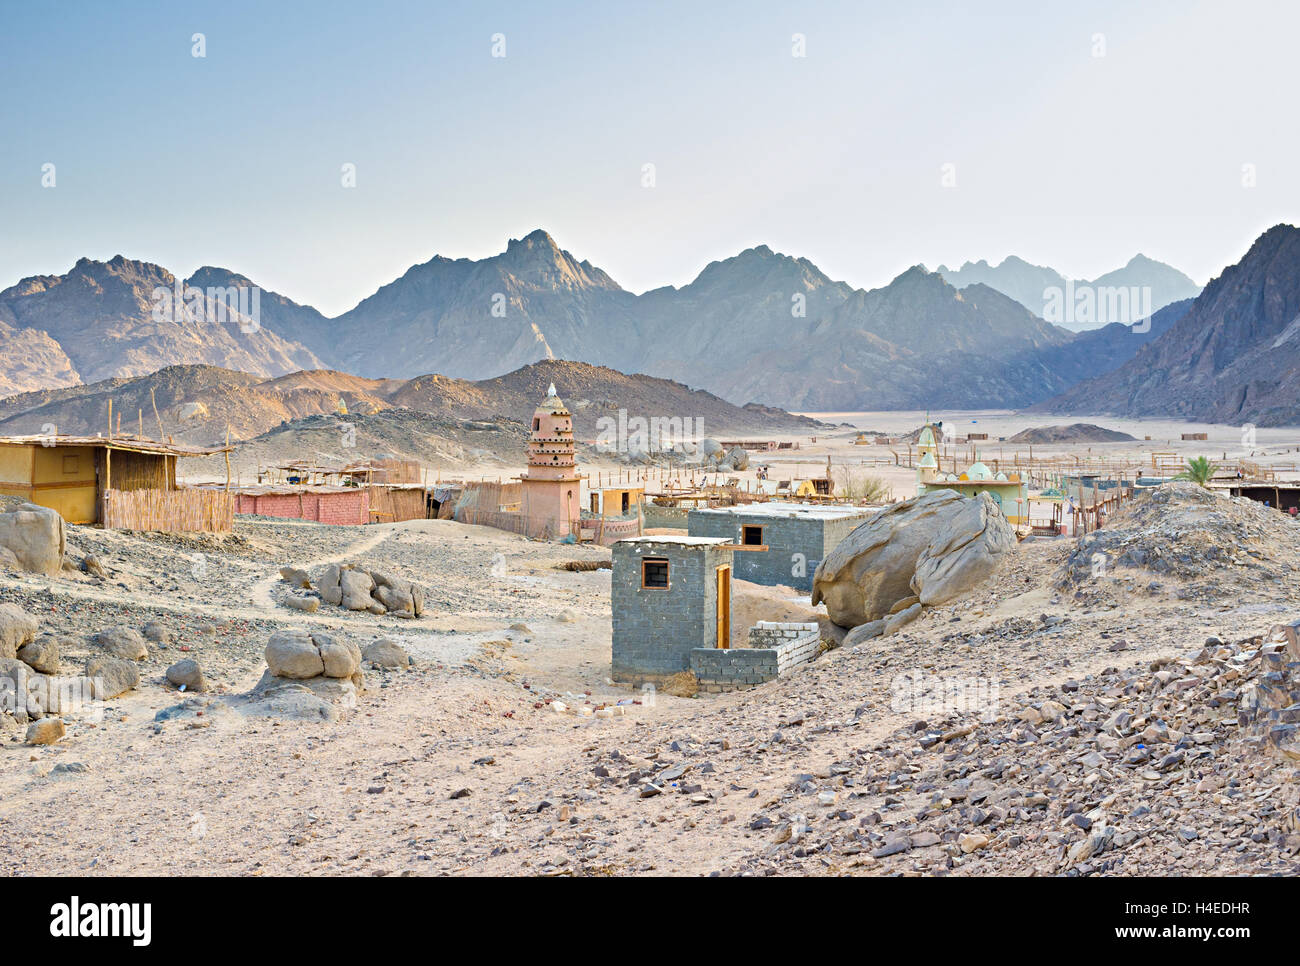 The small Bedouin village in the valley surrounded by hills and rocks, Sahara, Egypt. Stock Photo